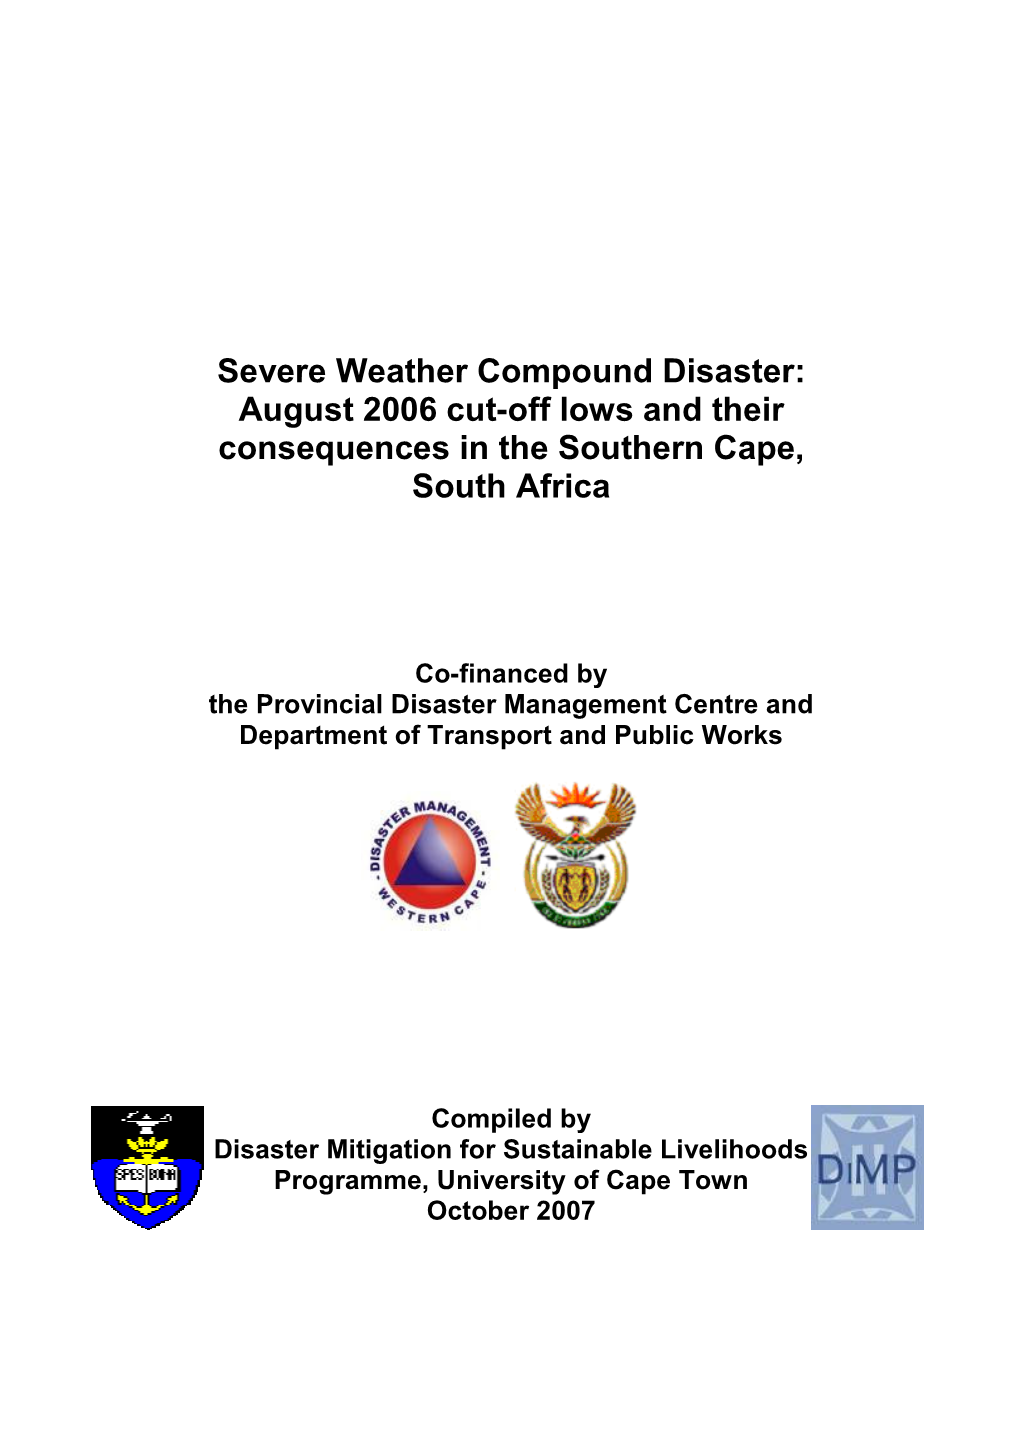 Severe Weather Compound Disaster: August 2006 Cut-Off Lows and Their Consequences in the Southern Cape, South Africa